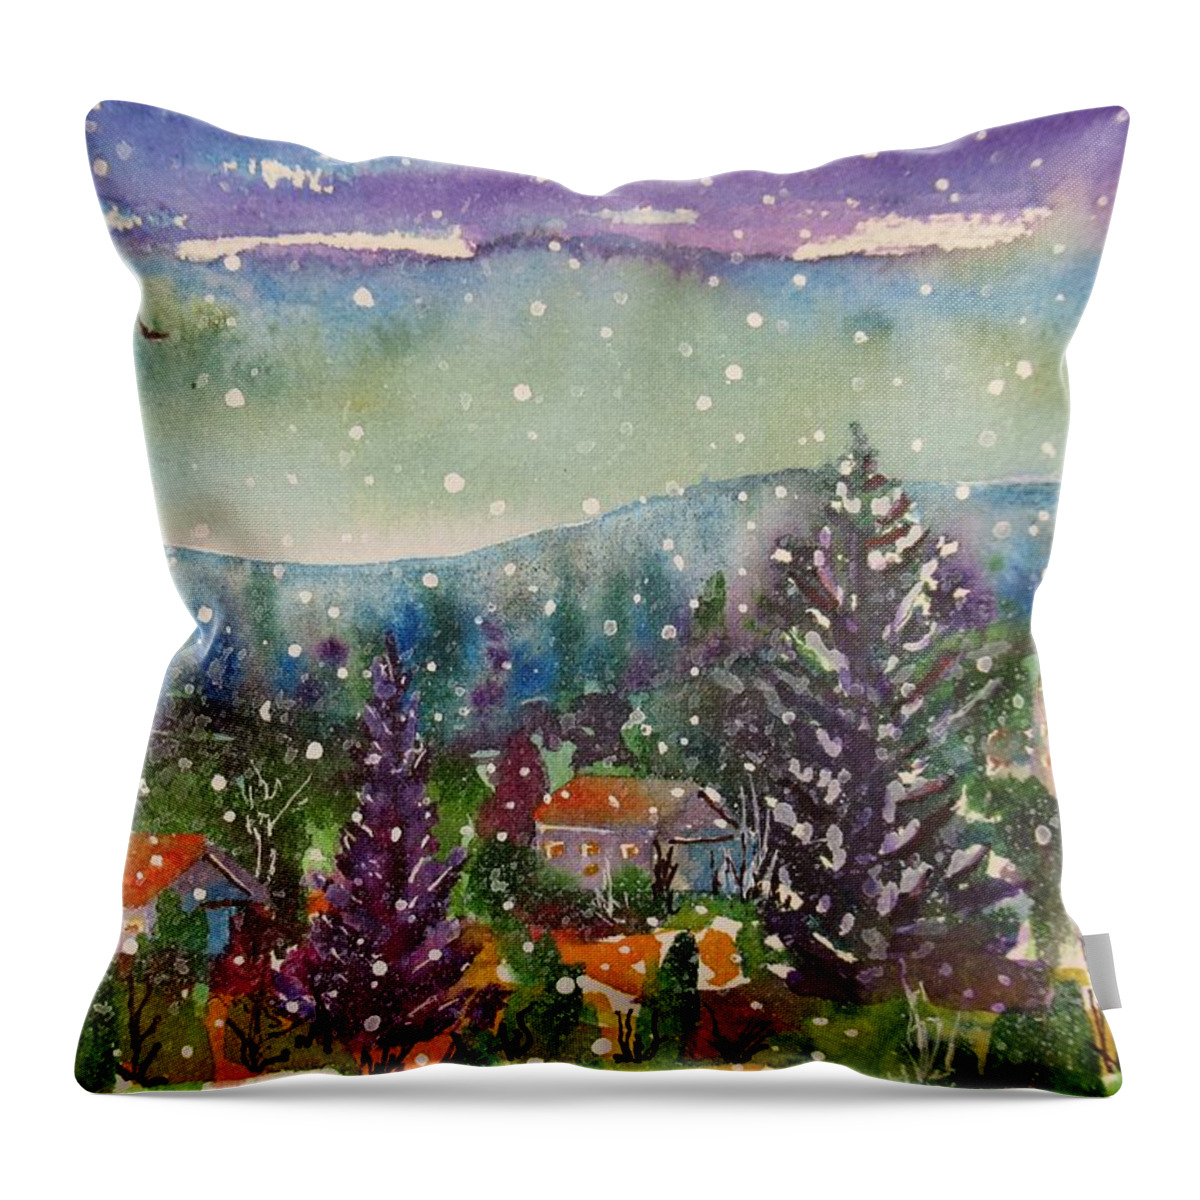 Hamlet Throw Pillow featuring the painting Hamlet In The Snow by Dale Bernard